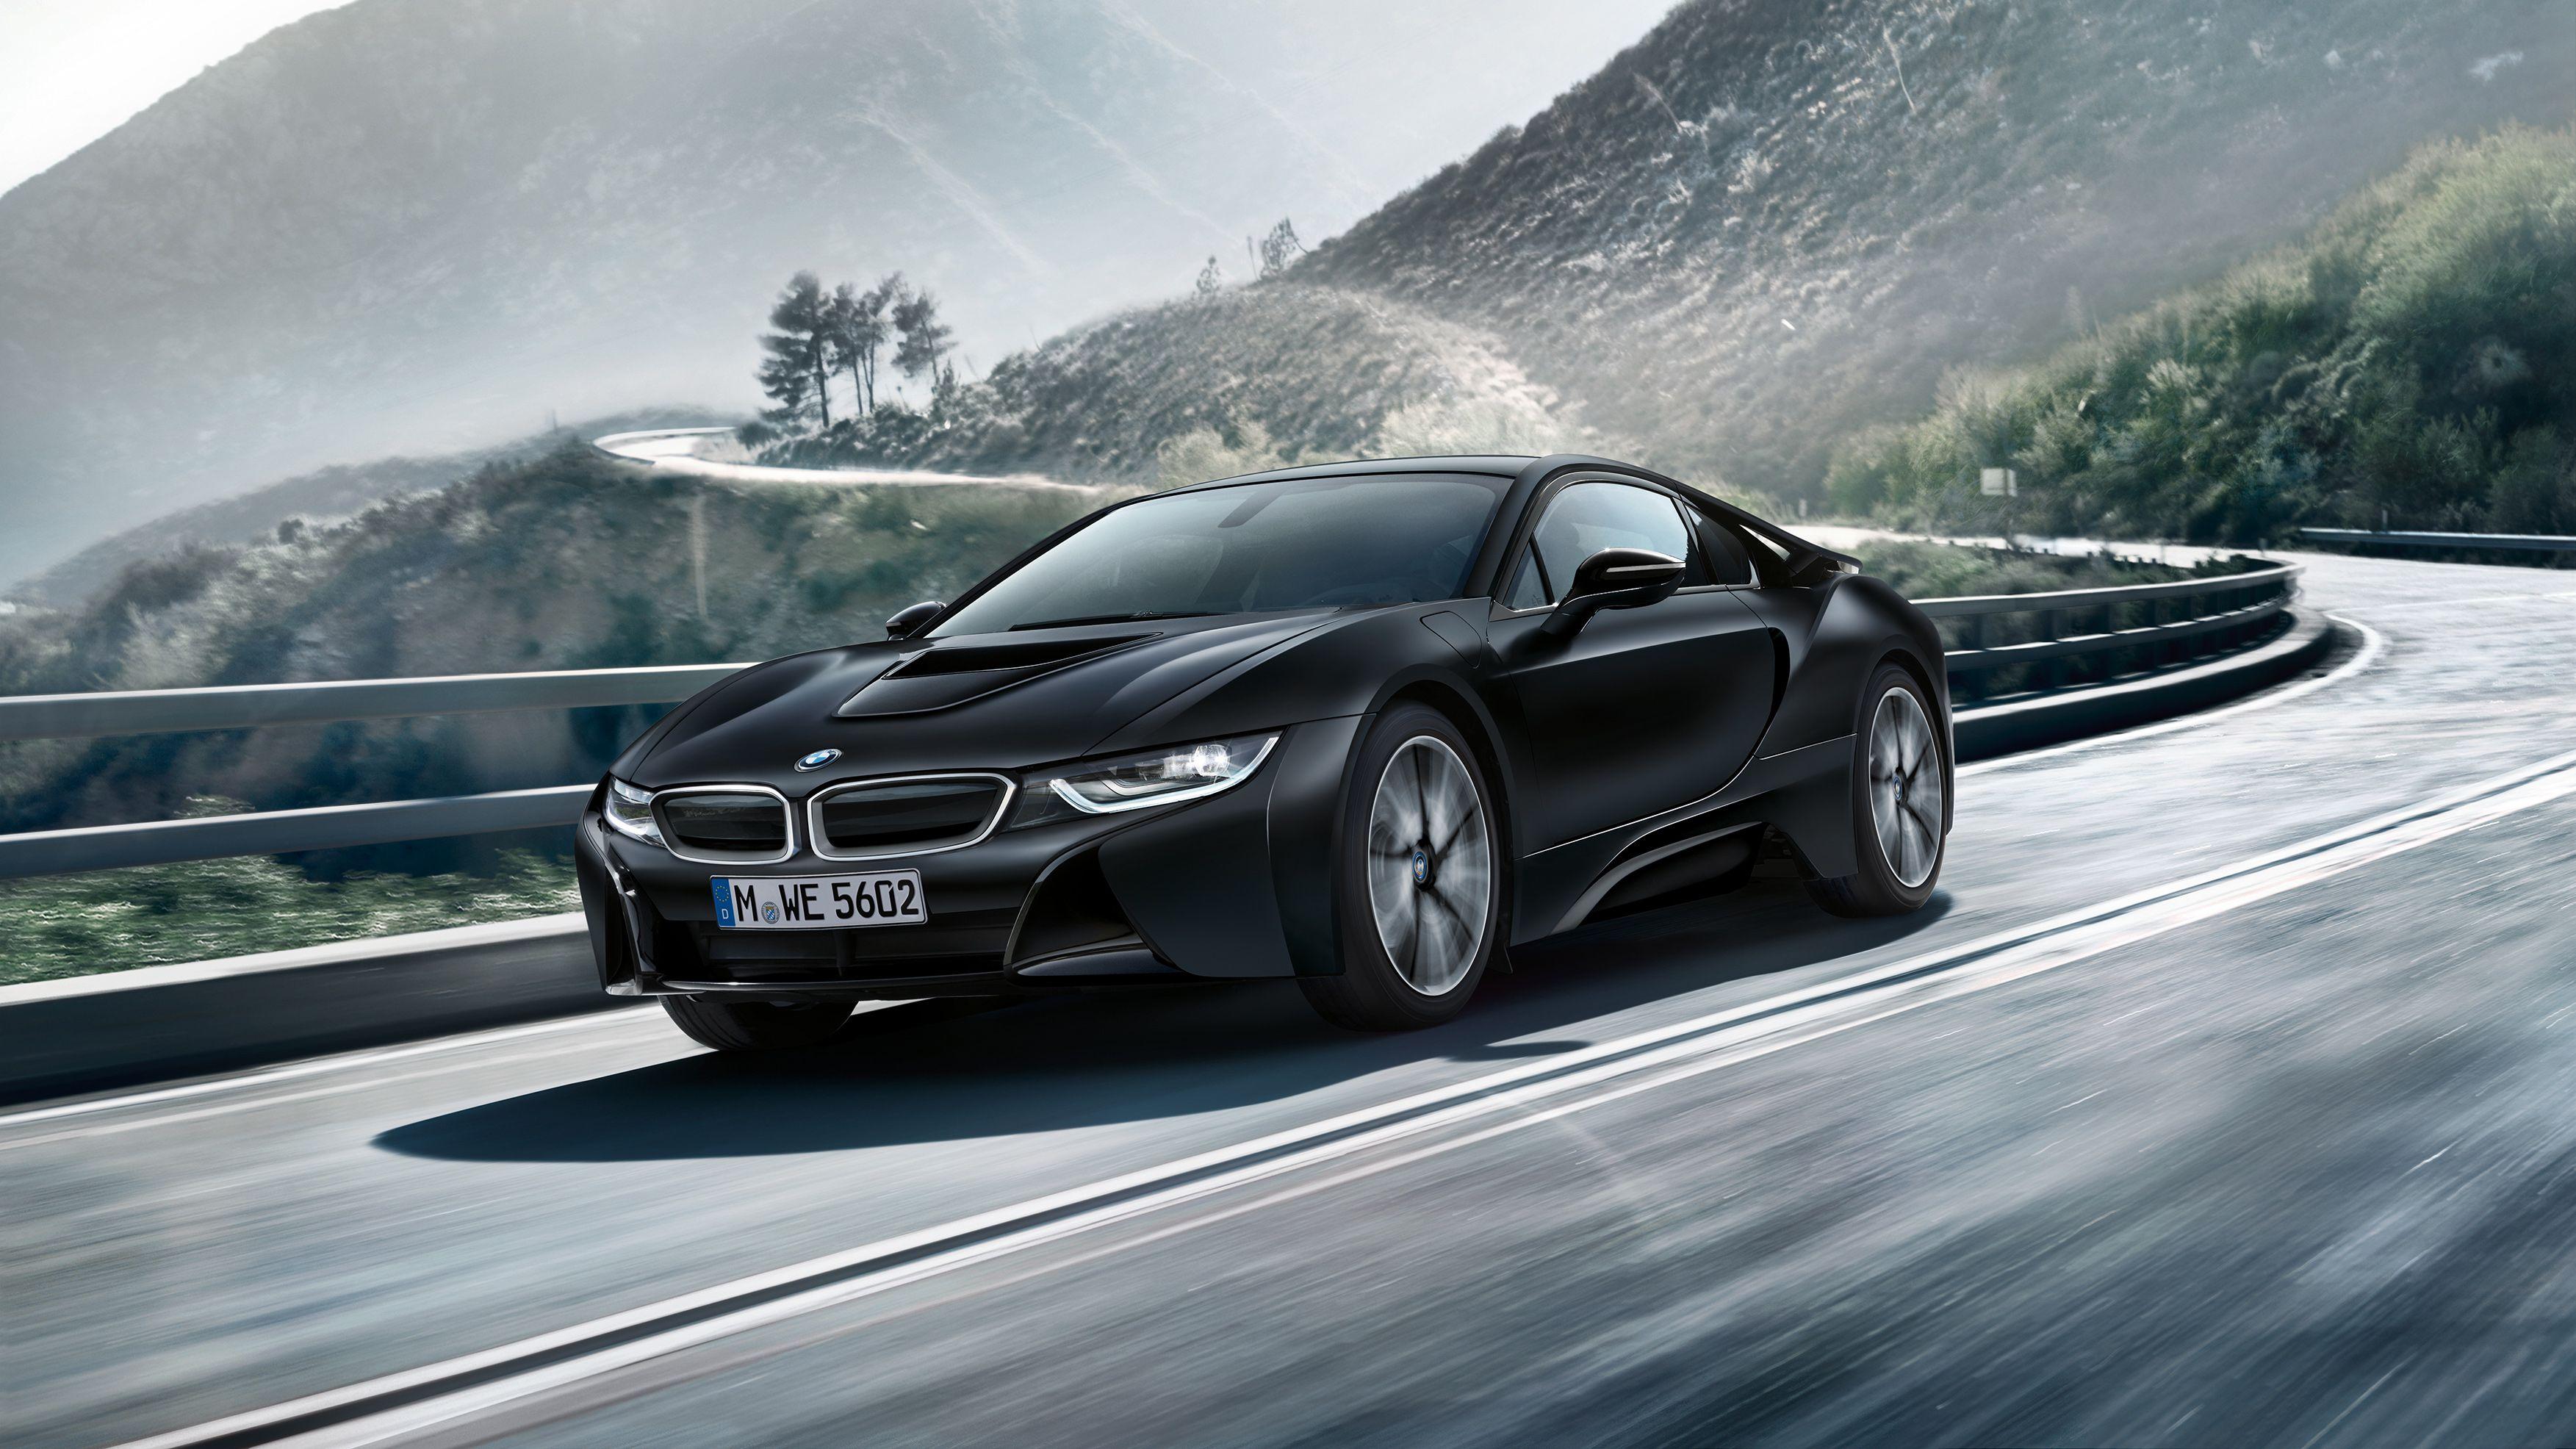 Wallpapers Hd Cars Bmw